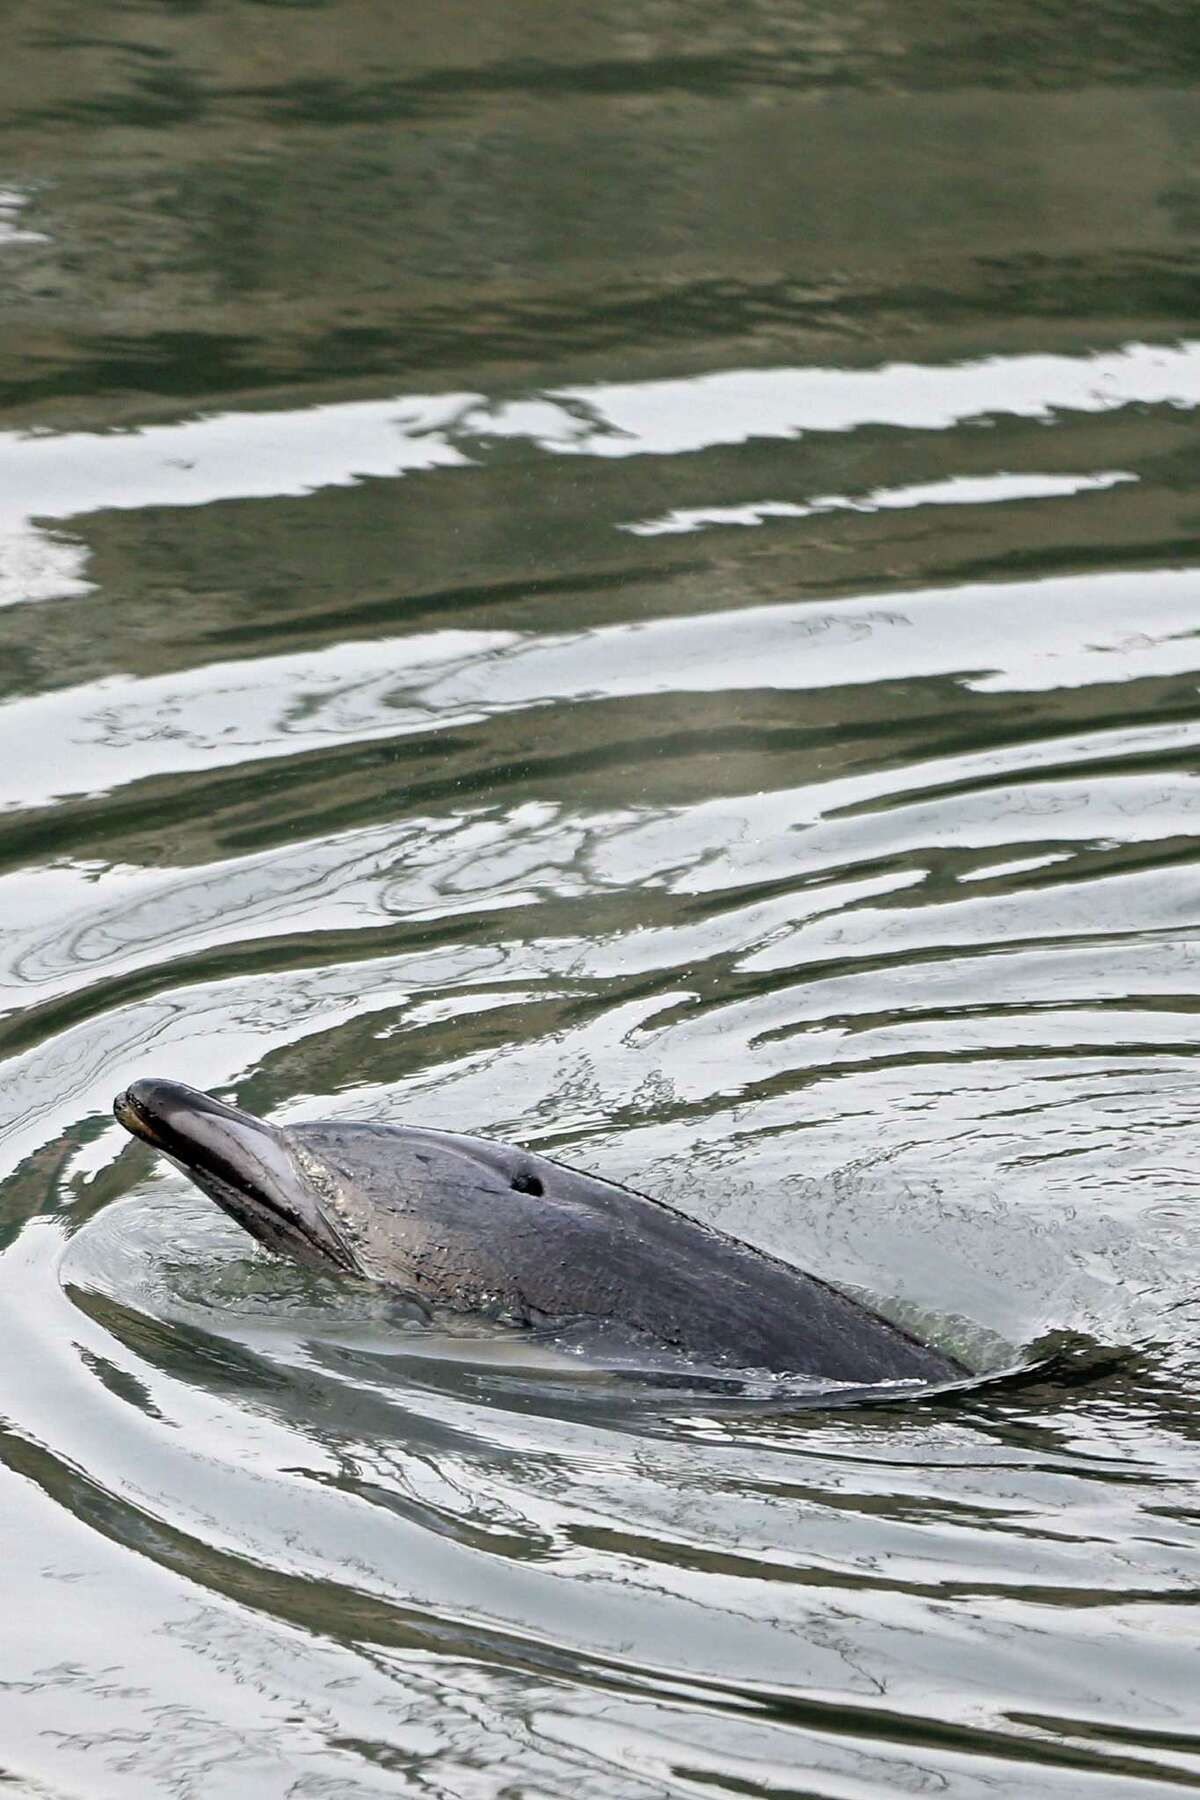 NEW YORK, NY - JANUARY 25: A common dolphin comes up for air after getting stuck in a section of the Gowanus Canal on January 25, 2013 in Brooklyn borough of New York City. Officials are waiting till high tide in the hopes that the stuck dolphin will be able to free itself from the canal.